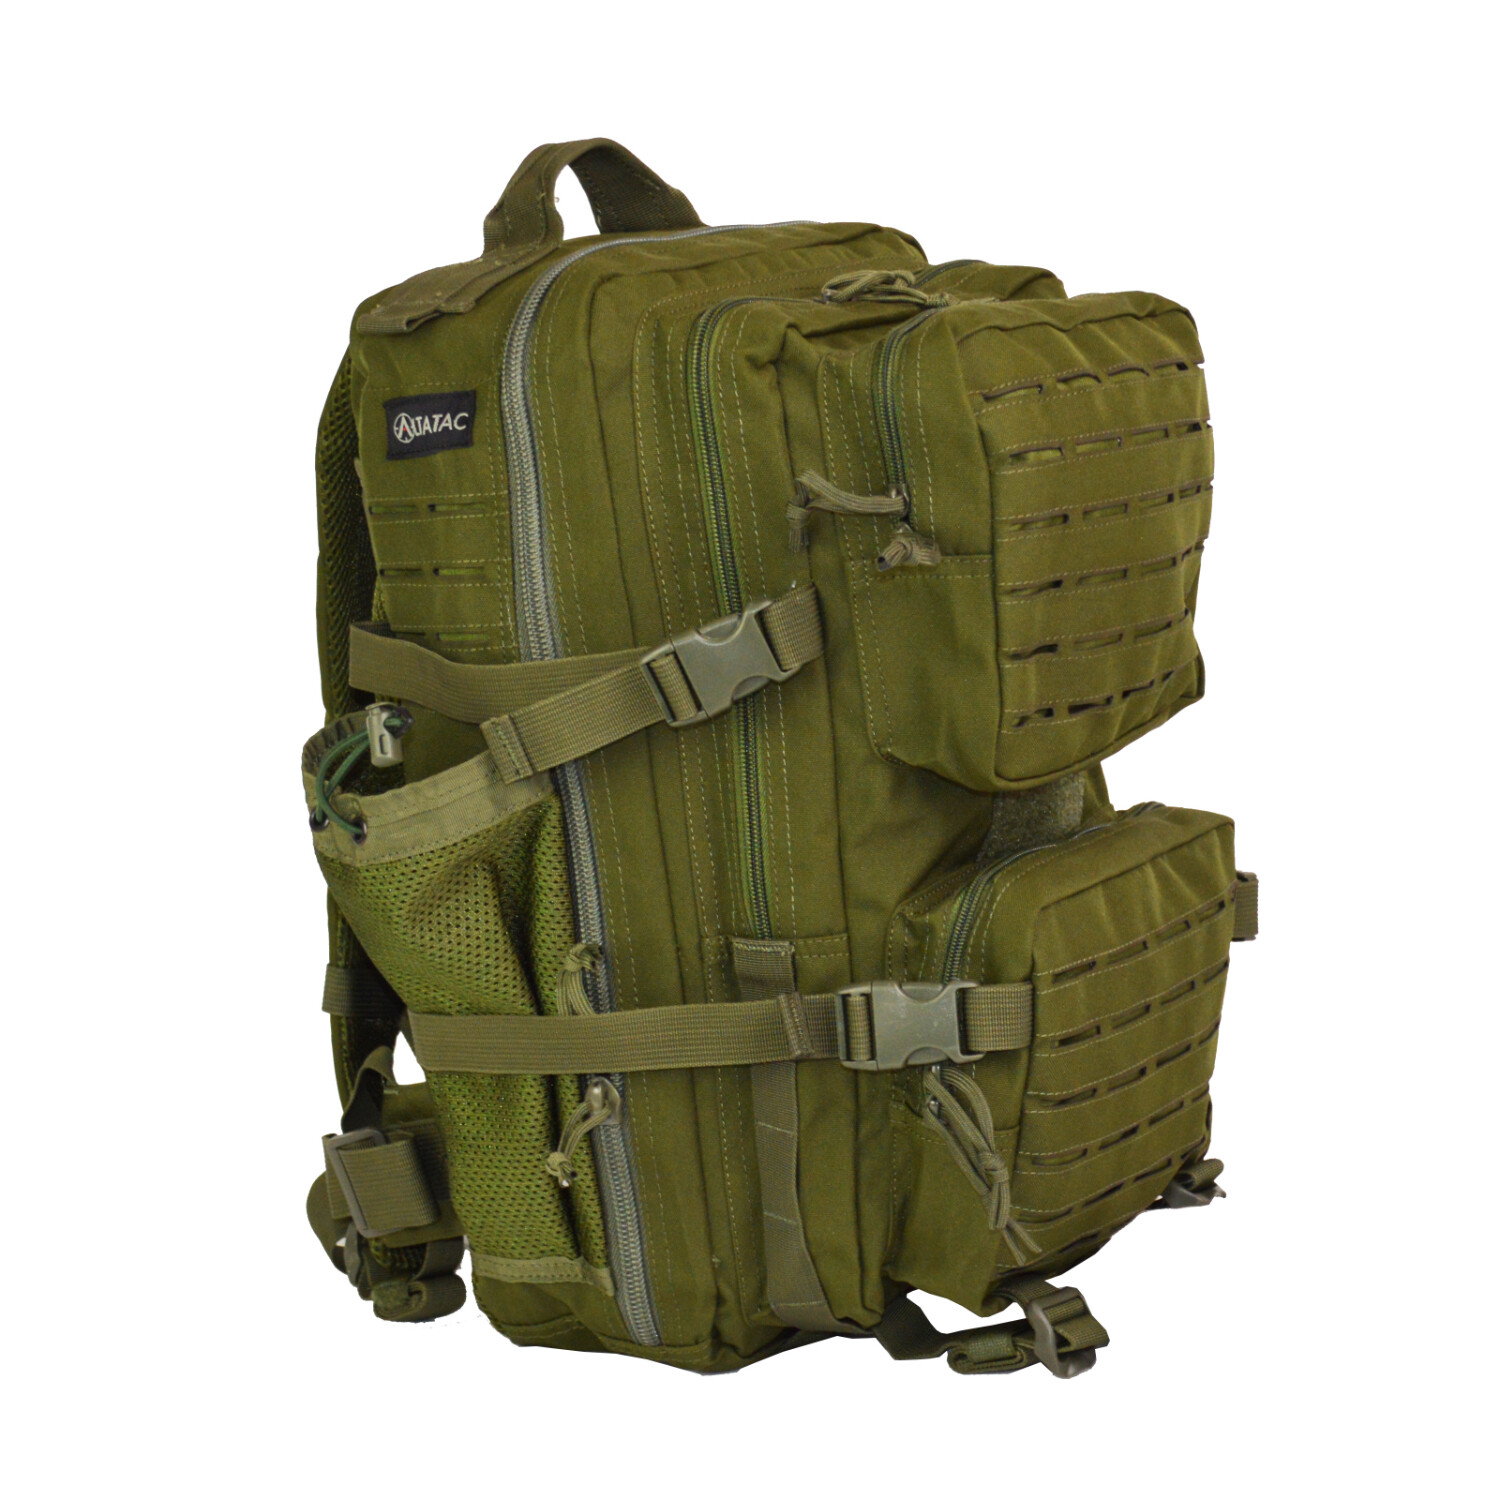 30L Outdoor Military Molle Tactical Hiking Camping Waterproof Rucksack Backpack O.D.GREEN